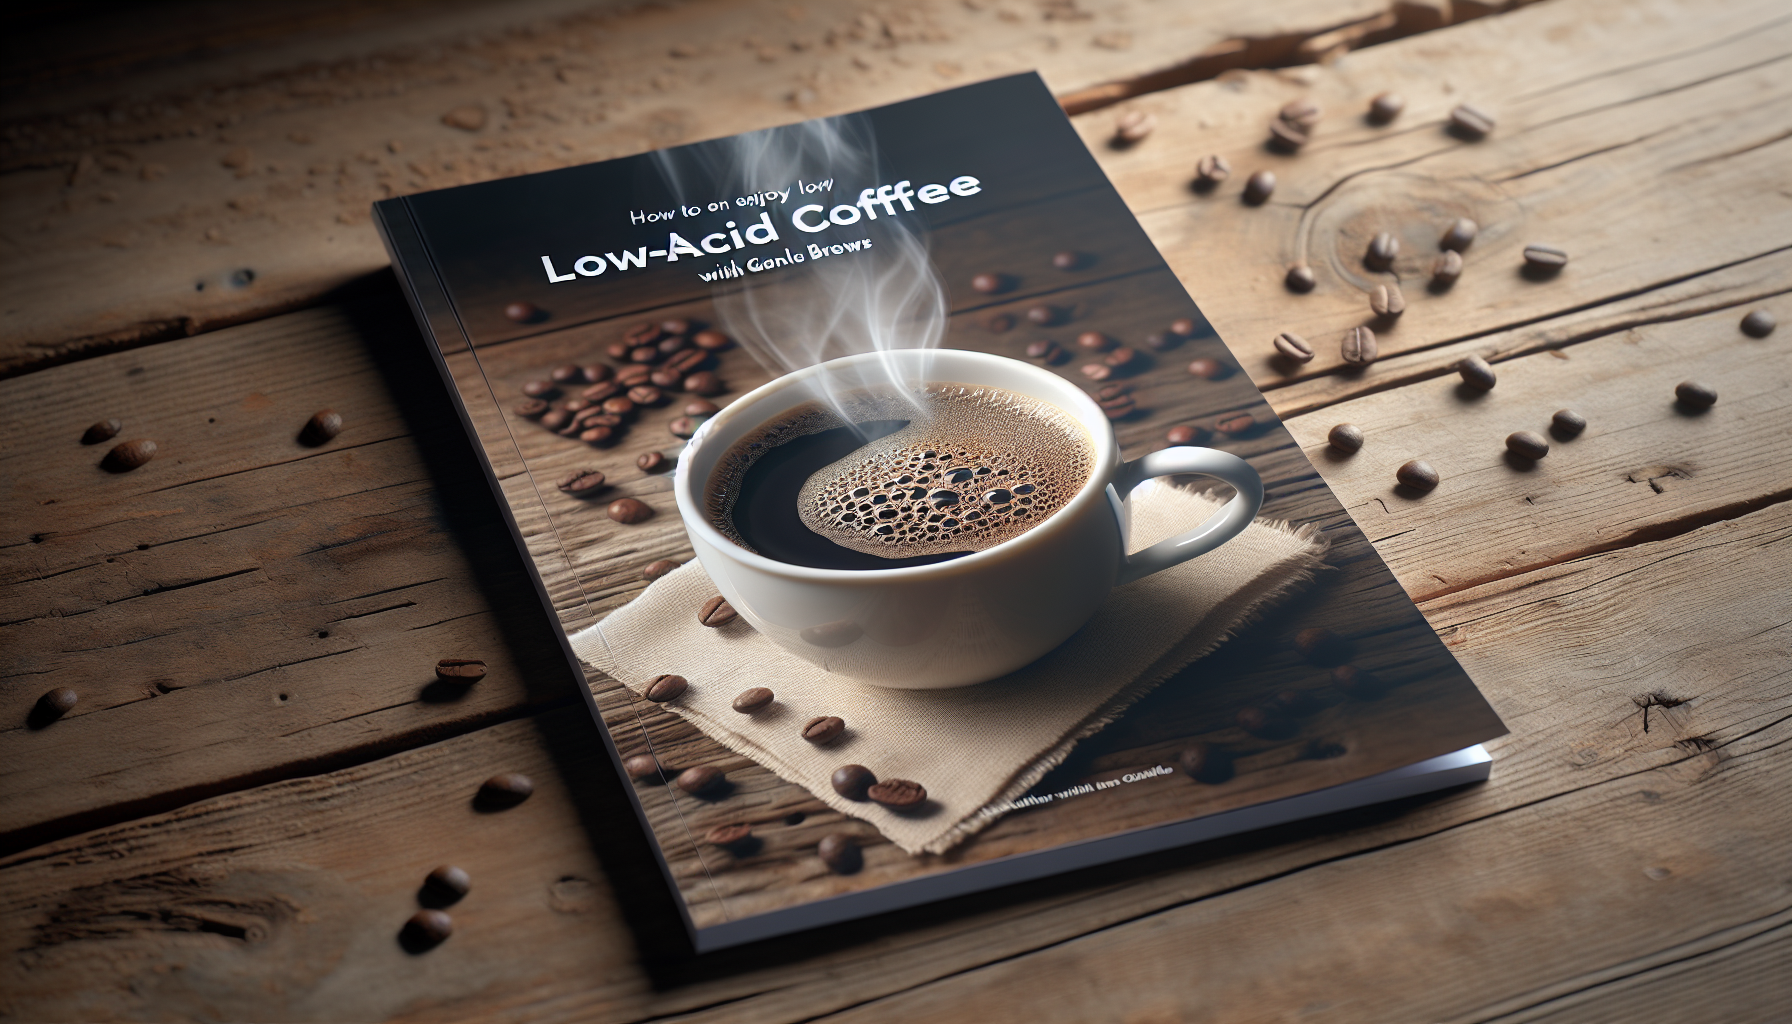 A comprehensive guide on how to enjoy Low-Acid Coffee with gentle brews. The cover page of the guide is adorned with a steamy, freshly prepared cup of low-acid coffee sitting atop a rustic wooden tabl